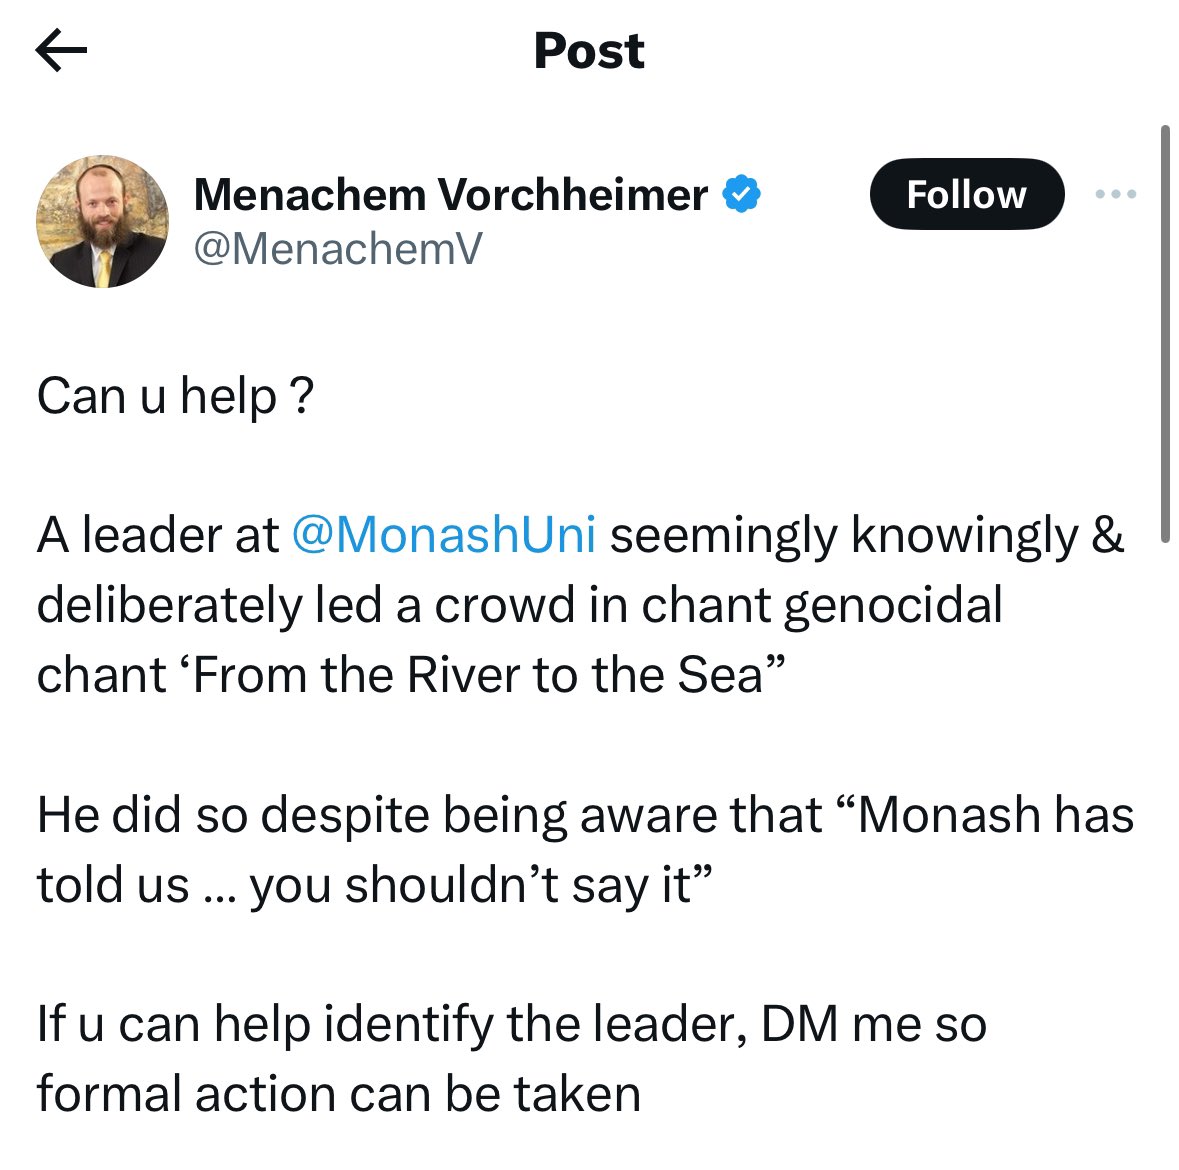 This is a grown man asking for help doxxing a university student for chanting a phrase that he doesn’t like. He wants to ruin a young persons life over speech, that’s how pathetic Zionists are.